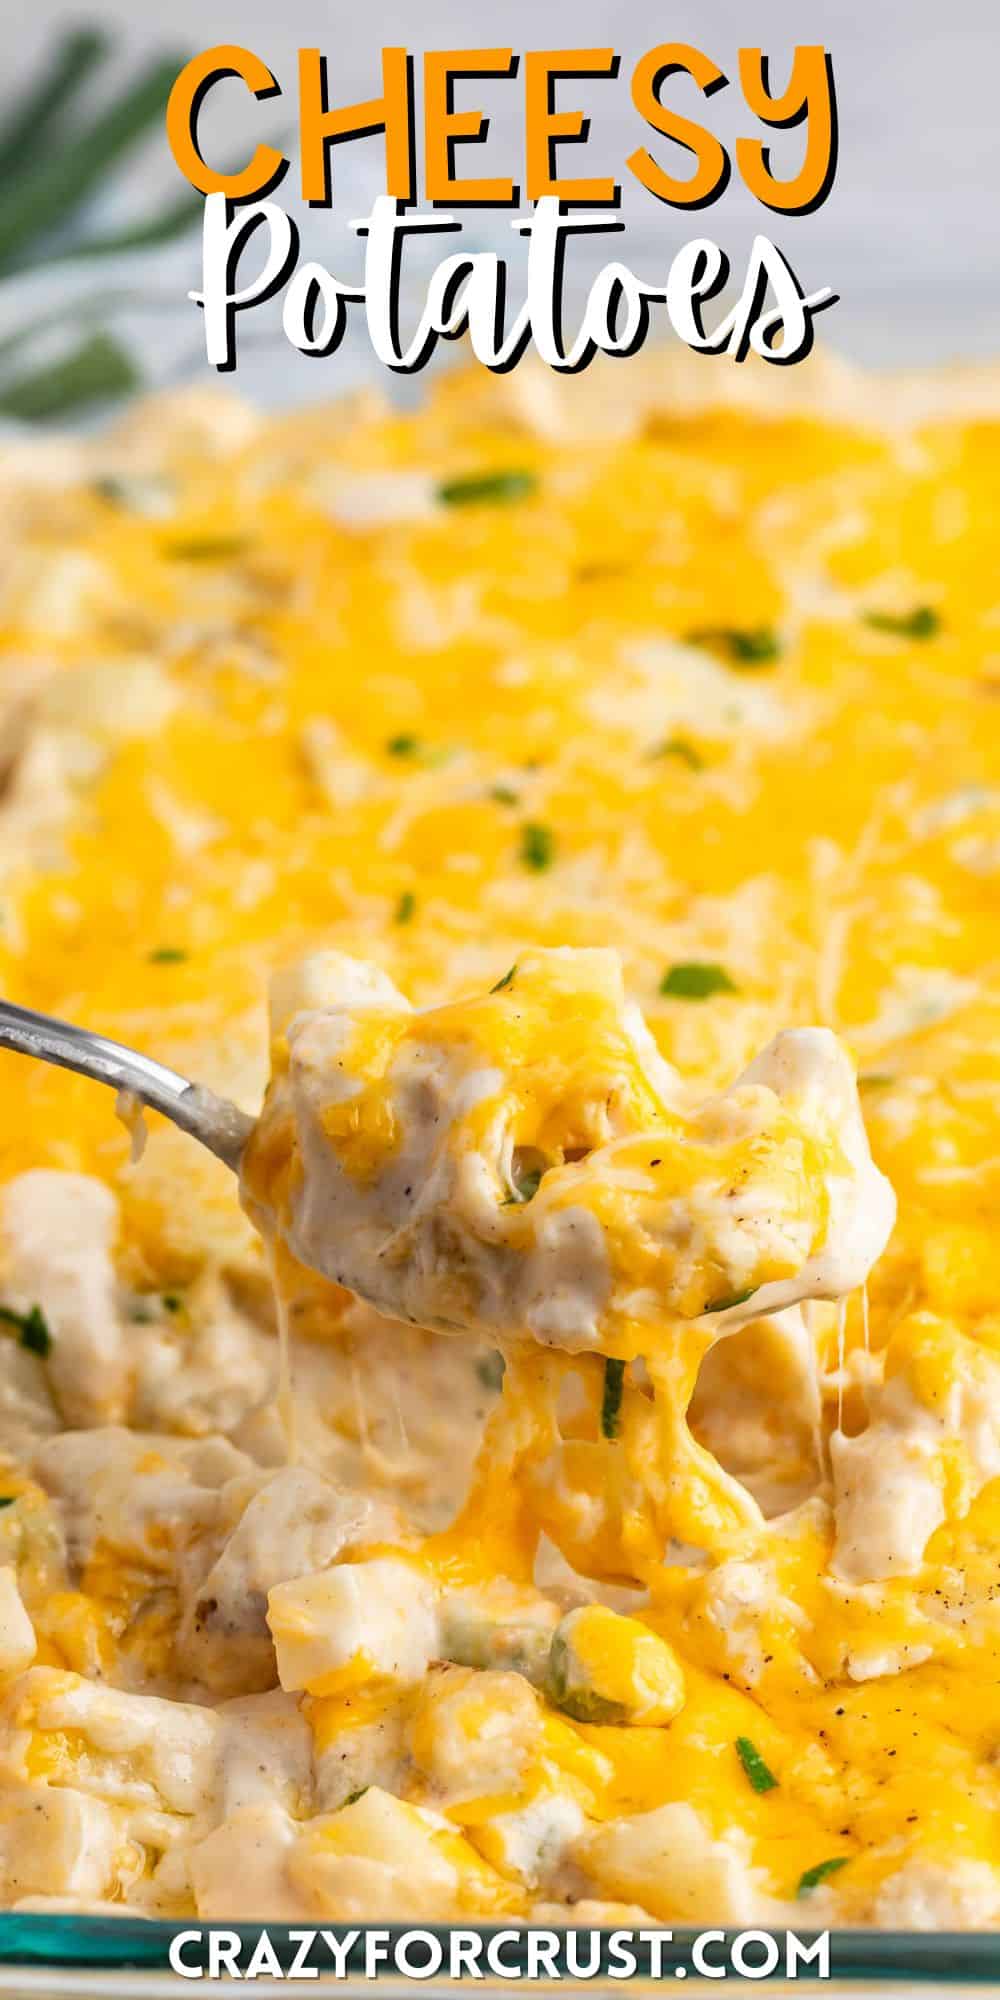 cheesy potato casserole in a clear casserole pan with green garnish with words on the image.